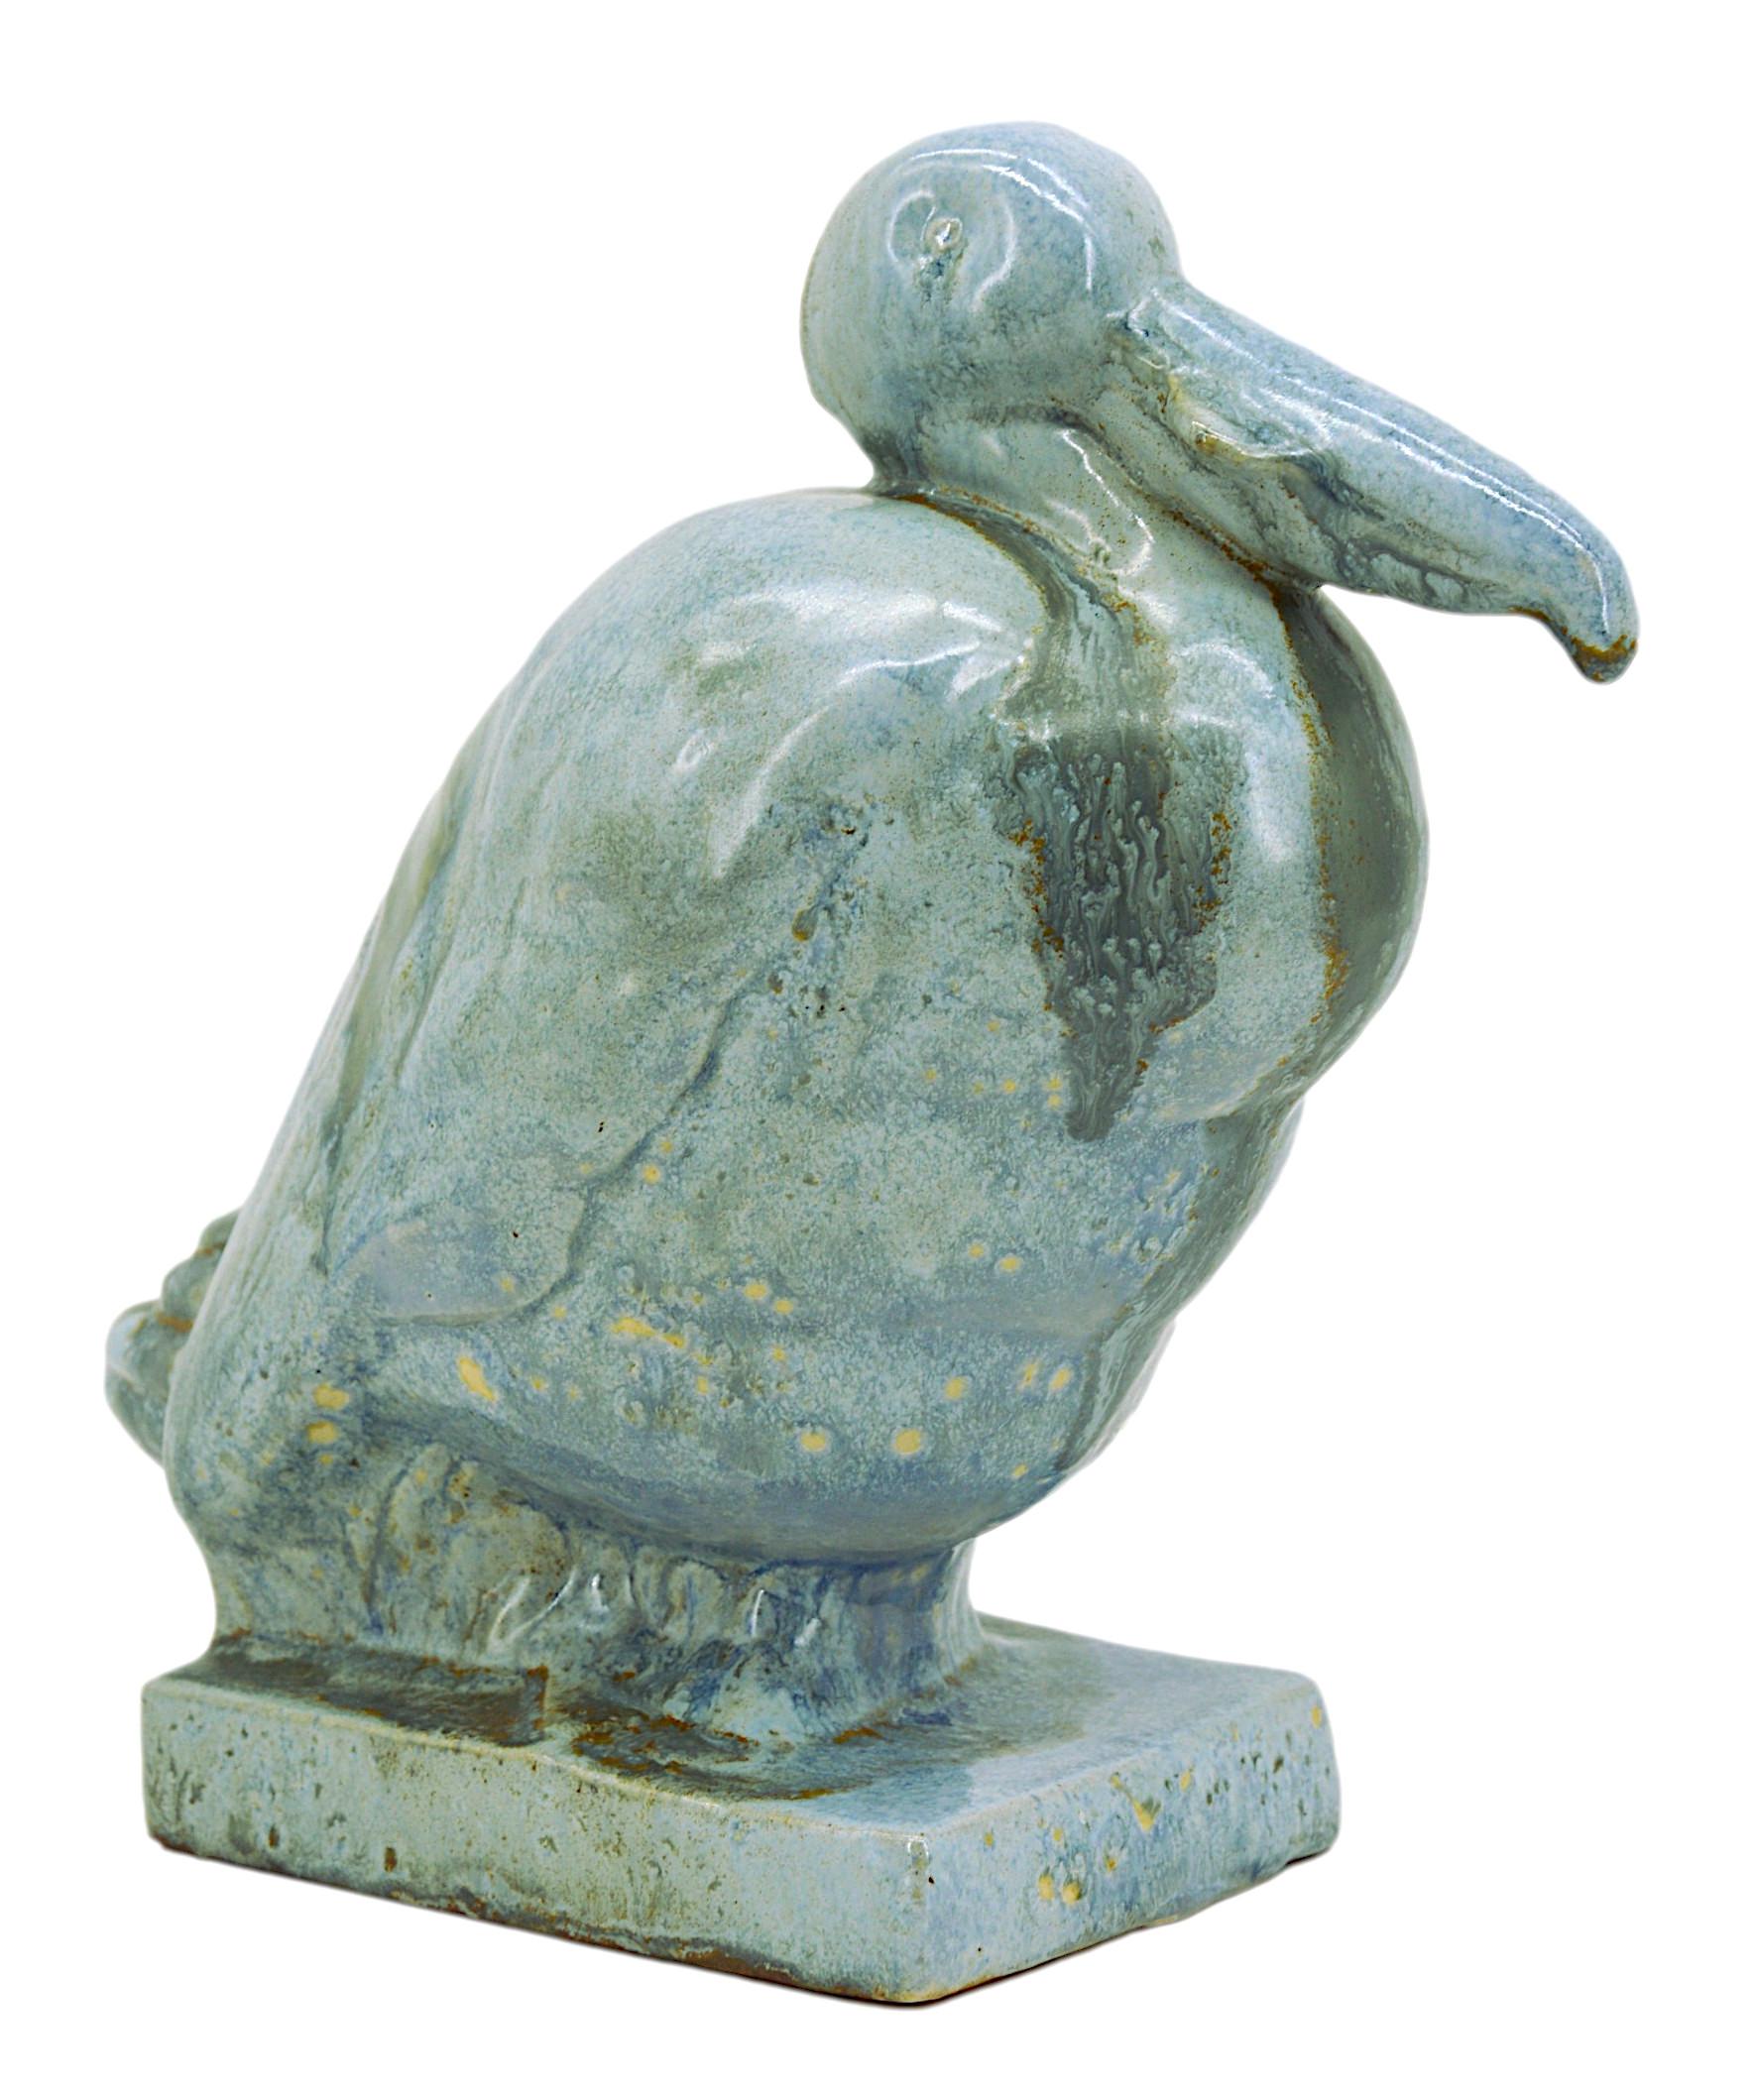 French Art Deco ceramic seagull statue by Moulin-des-Loups (Orchies), France, ca.1930. Seagull with a fish in its beak. Height : 8.7